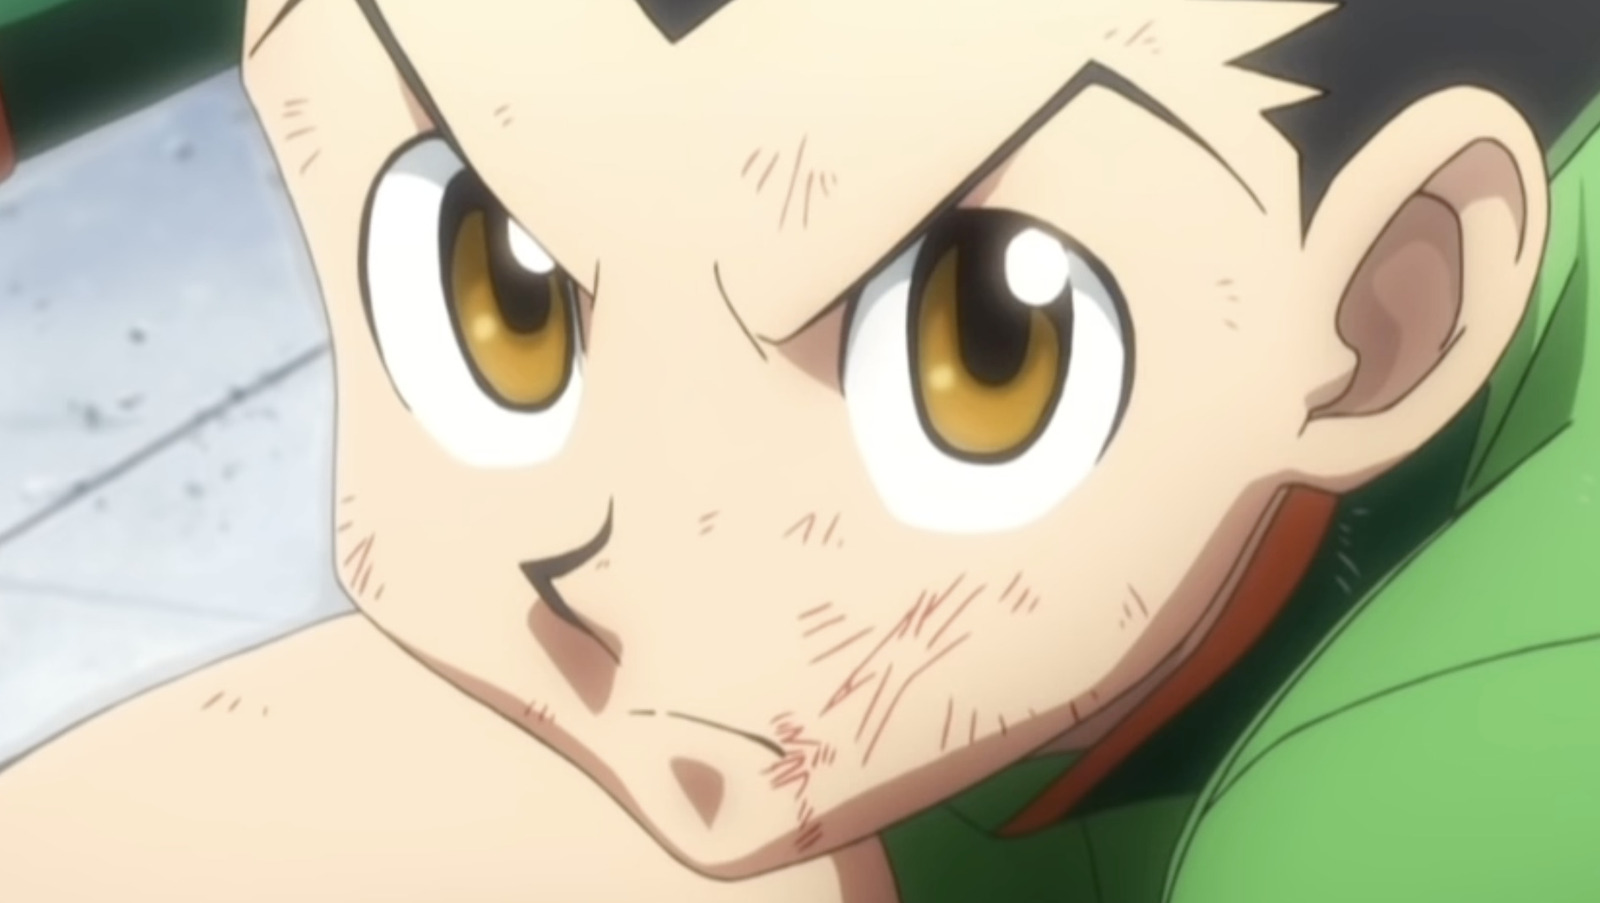 Hunter x Hunter: 8 Characters Stronger Than Gon (& 7 Who Are Weaker)